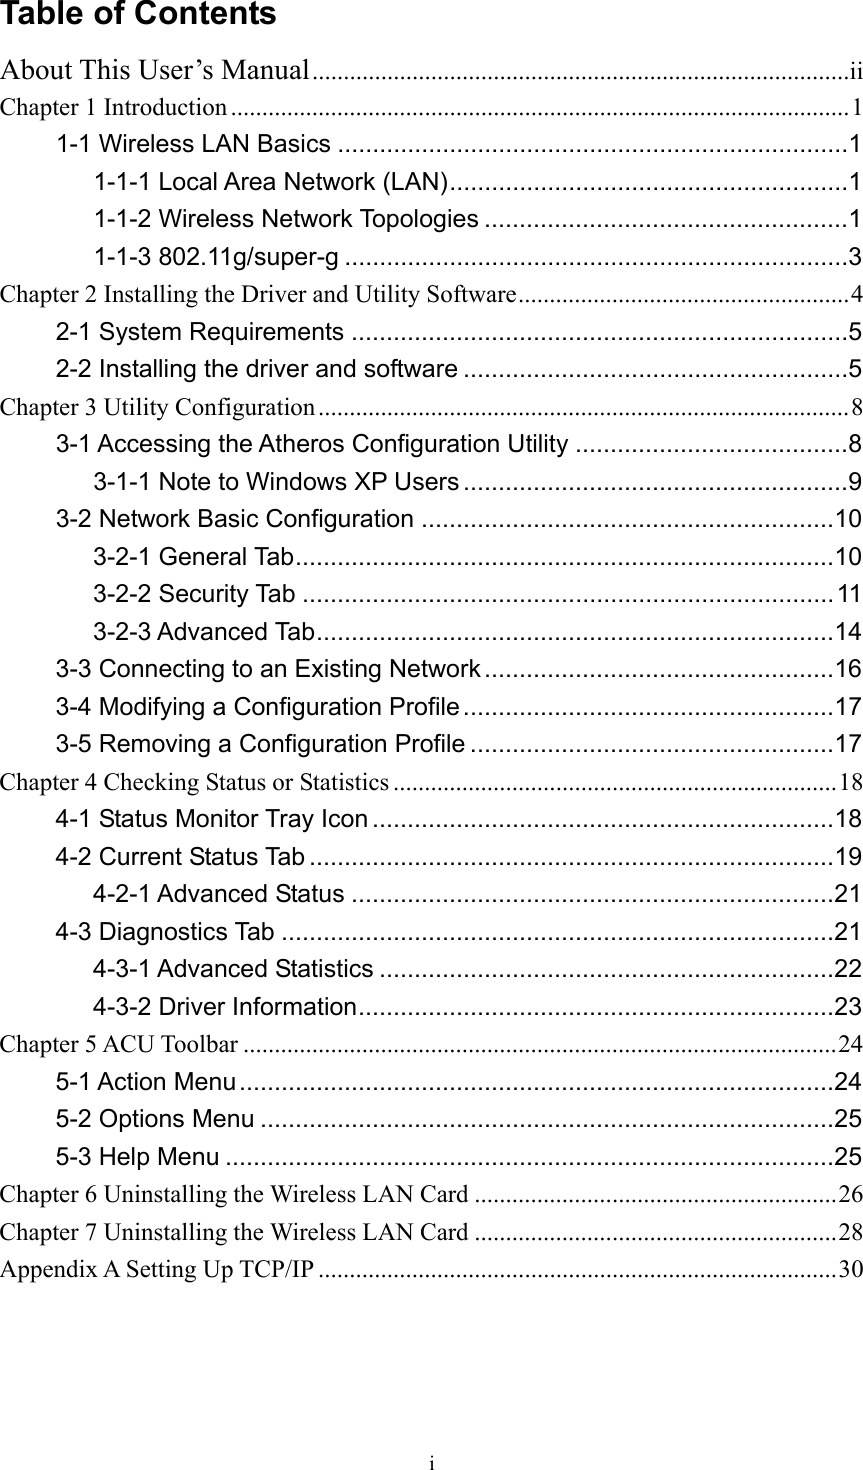  i Table of Contents About This User’s Manual......................................................................................ii Chapter 1 Introduction ...................................................................................................1 1-1 Wireless LAN Basics .........................................................................1 1-1-1 Local Area Network (LAN).........................................................1 1-1-2 Wireless Network Topologies ....................................................1 1-1-3 802.11g/super-g ........................................................................3 Chapter 2 Installing the Driver and Utility Software.....................................................4 2-1 System Requirements .......................................................................5 2-2 Installing the driver and software .......................................................5 Chapter 3 Utility Configuration.....................................................................................8 3-1 Accessing the Atheros Configuration Utility .......................................8 3-1-1 Note to Windows XP Users .......................................................9 3-2 Network Basic Configuration ...........................................................10 3-2-1 General Tab.............................................................................10 3-2-2 Security Tab ............................................................................11 3-2-3 Advanced Tab..........................................................................14 3-3 Connecting to an Existing Network ..................................................16 3-4 Modifying a Configuration Profile .....................................................17 3-5 Removing a Configuration Profile ....................................................17 Chapter 4 Checking Status or Statistics .......................................................................18 4-1 Status Monitor Tray Icon ..................................................................18 4-2 Current Status Tab ...........................................................................19 4-2-1 Advanced Status .....................................................................21 4-3 Diagnostics Tab ...............................................................................21 4-3-1 Advanced Statistics .................................................................22 4-3-2 Driver Information....................................................................23 Chapter 5 ACU Toolbar ...............................................................................................24 5-1 Action Menu.....................................................................................24 5-2 Options Menu ..................................................................................25 5-3 Help Menu .......................................................................................25 Chapter 6 Uninstalling the Wireless LAN Card ..........................................................26 Chapter 7 Uninstalling the Wireless LAN Card ..........................................................28 Appendix A Setting Up TCP/IP ...................................................................................30  